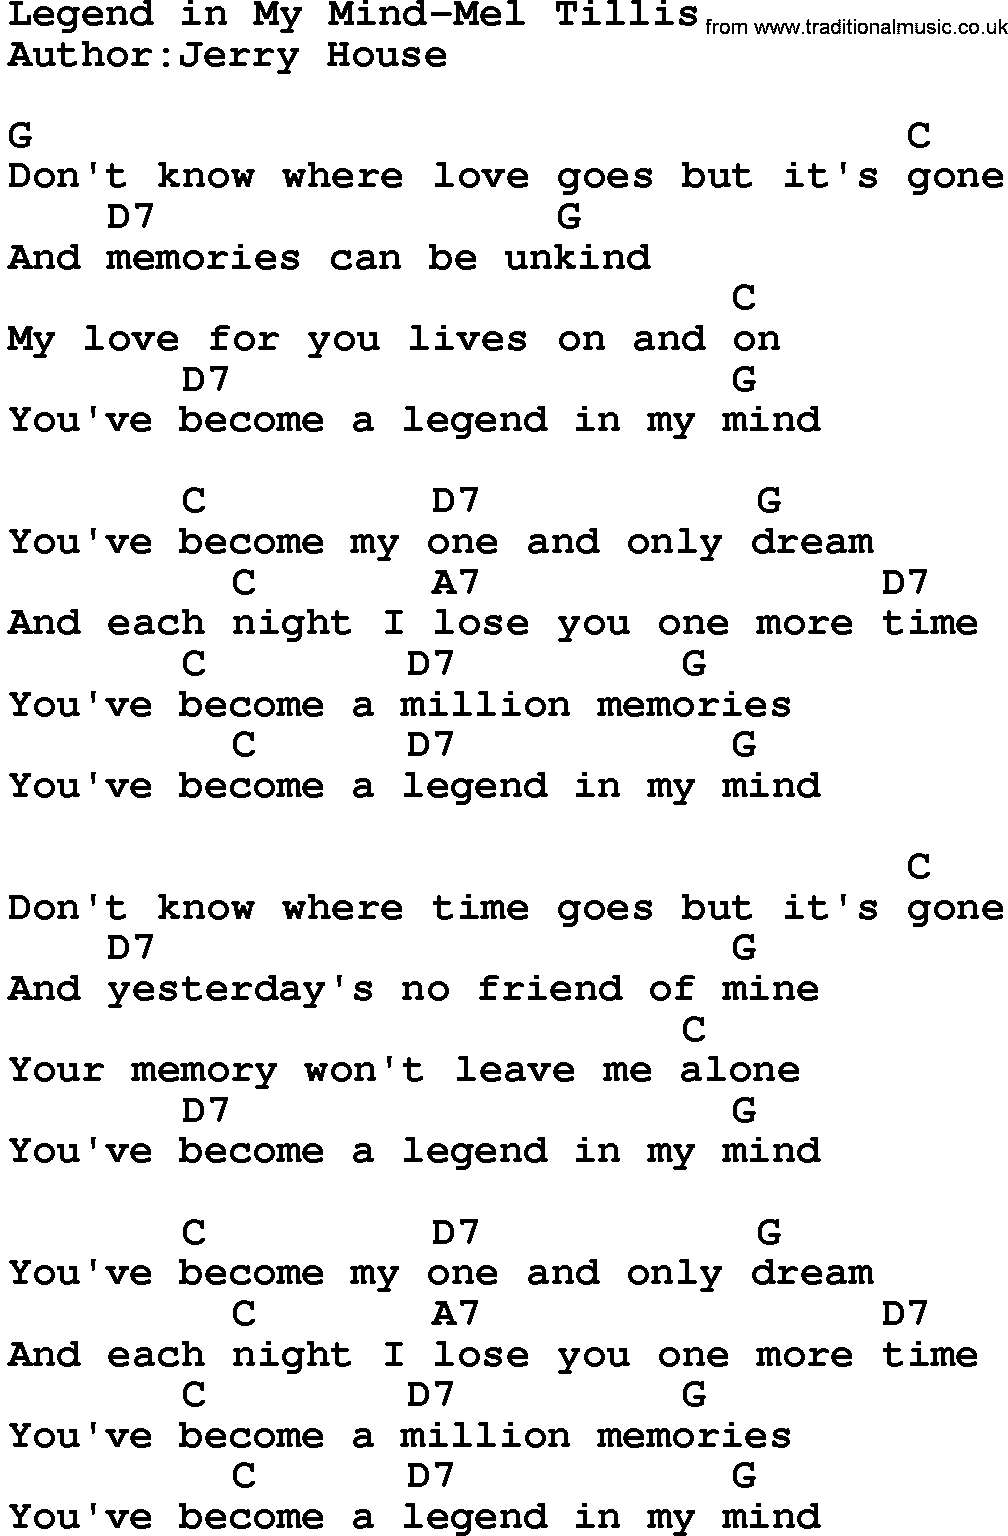 Country music song: Legend In My Mind-Mel Tillis lyrics and chords